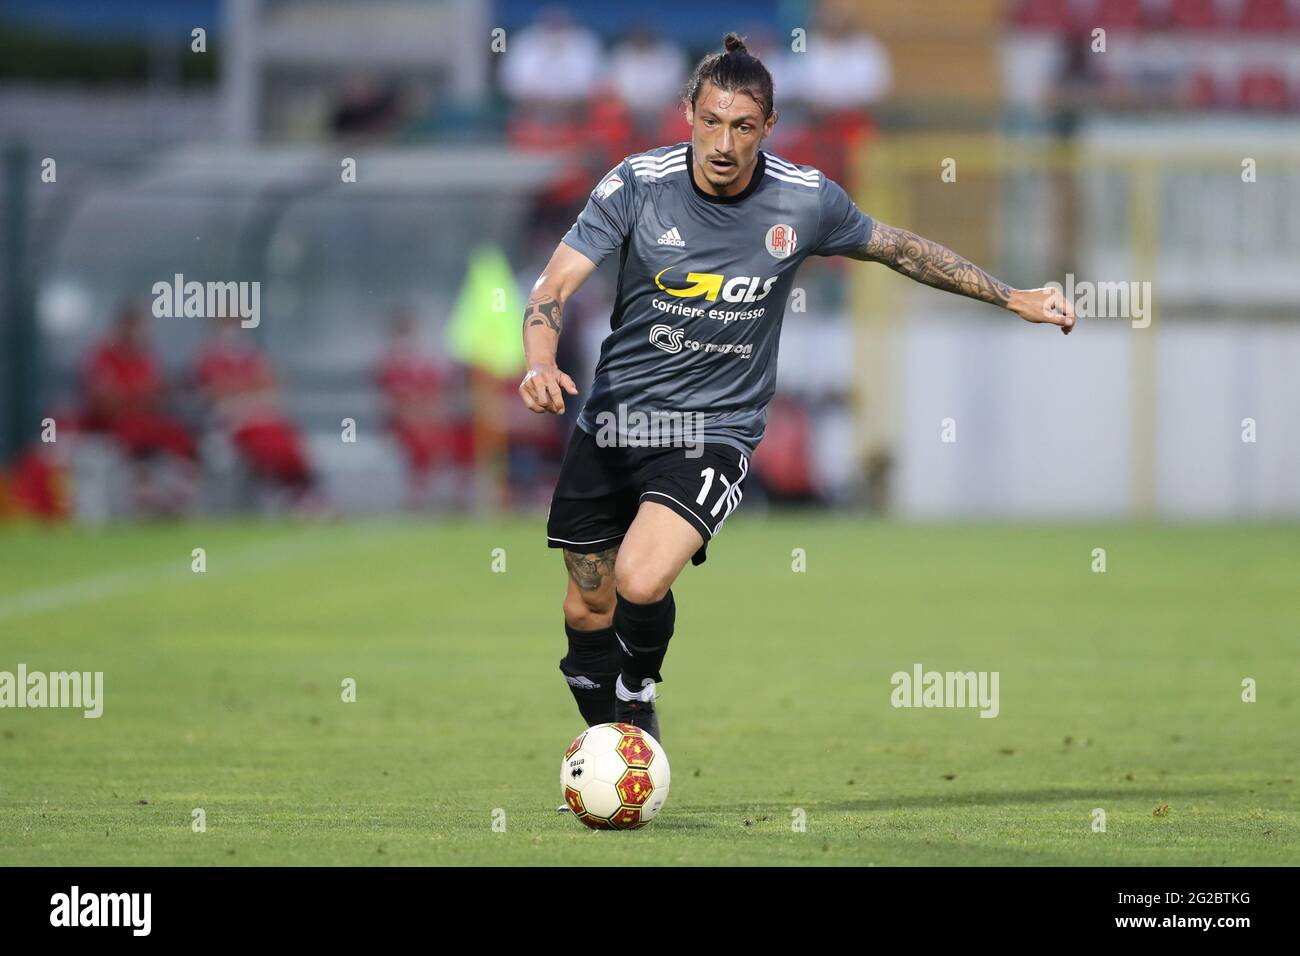 Alessandria, Italy, 9th June 2021. Mattia Mustacchio of US Alessandria during the Serie C match at Stadio Giuseppe Moccagatta - Alessandria, Torino. Picture credit should read: Jonathan Moscrop / Sportimage Credit: Sportimage/Alamy Live News Stock Photo